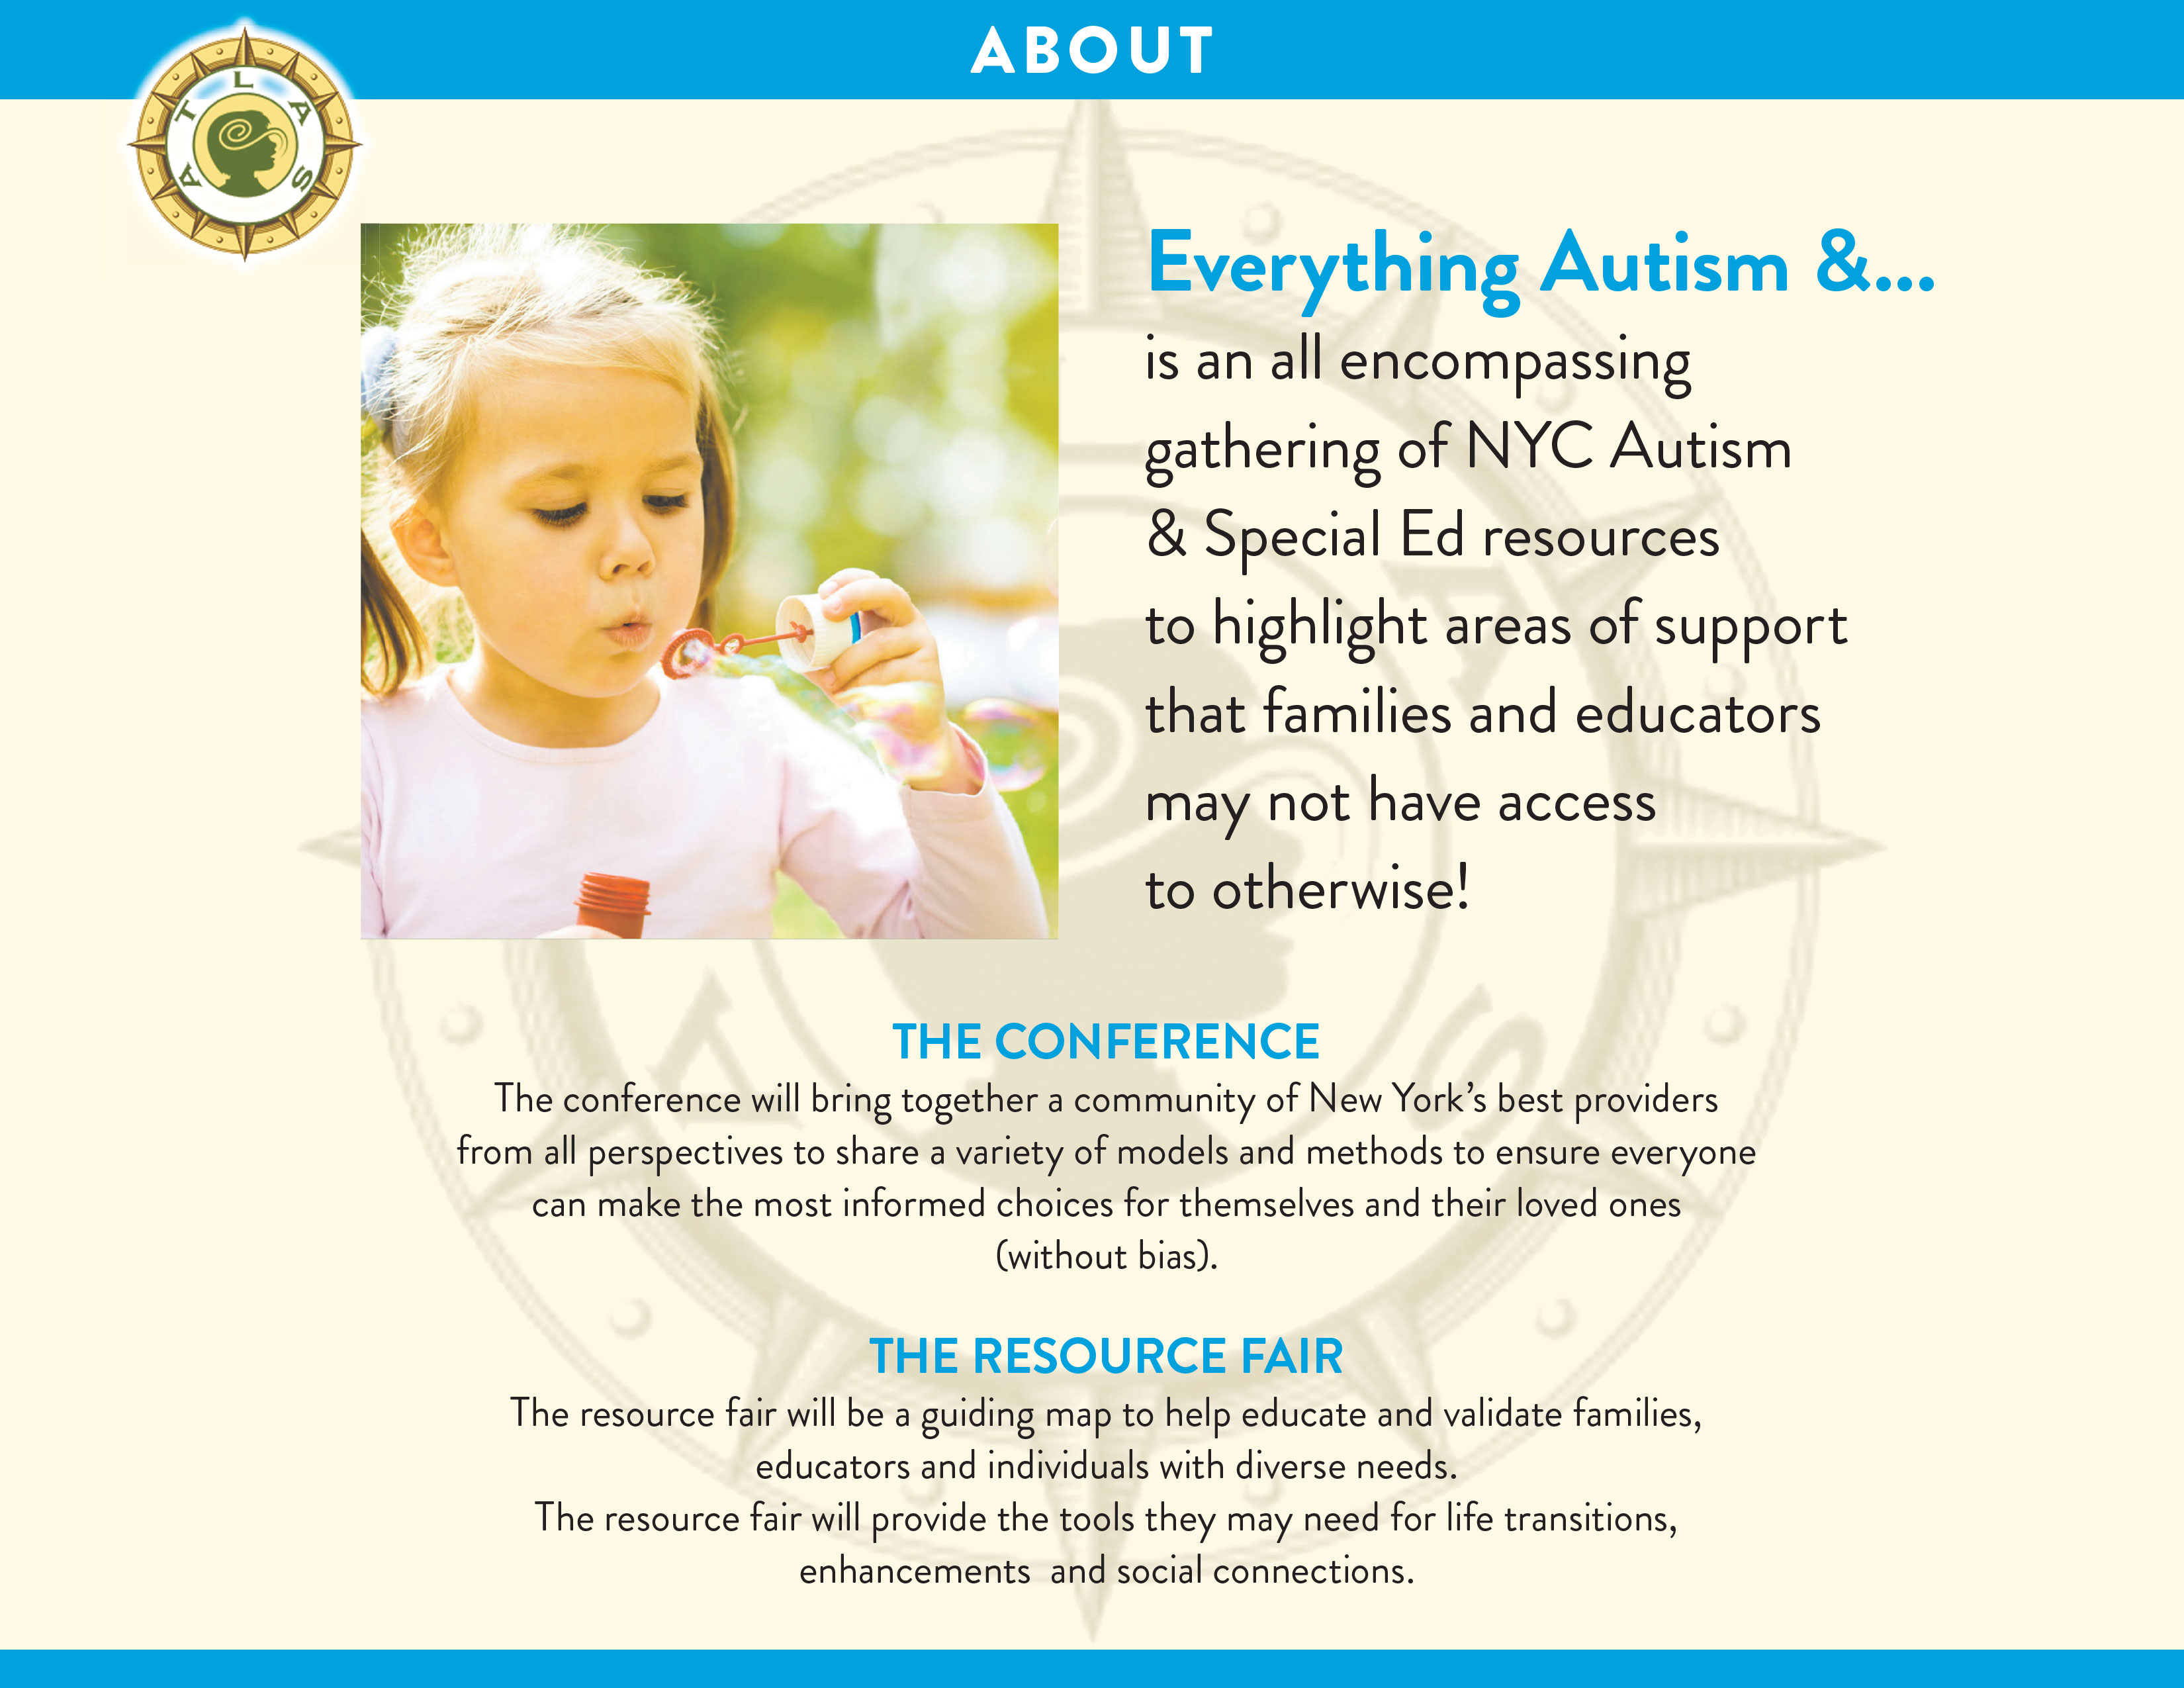 About Everything Autism and Conference and Resource Fair